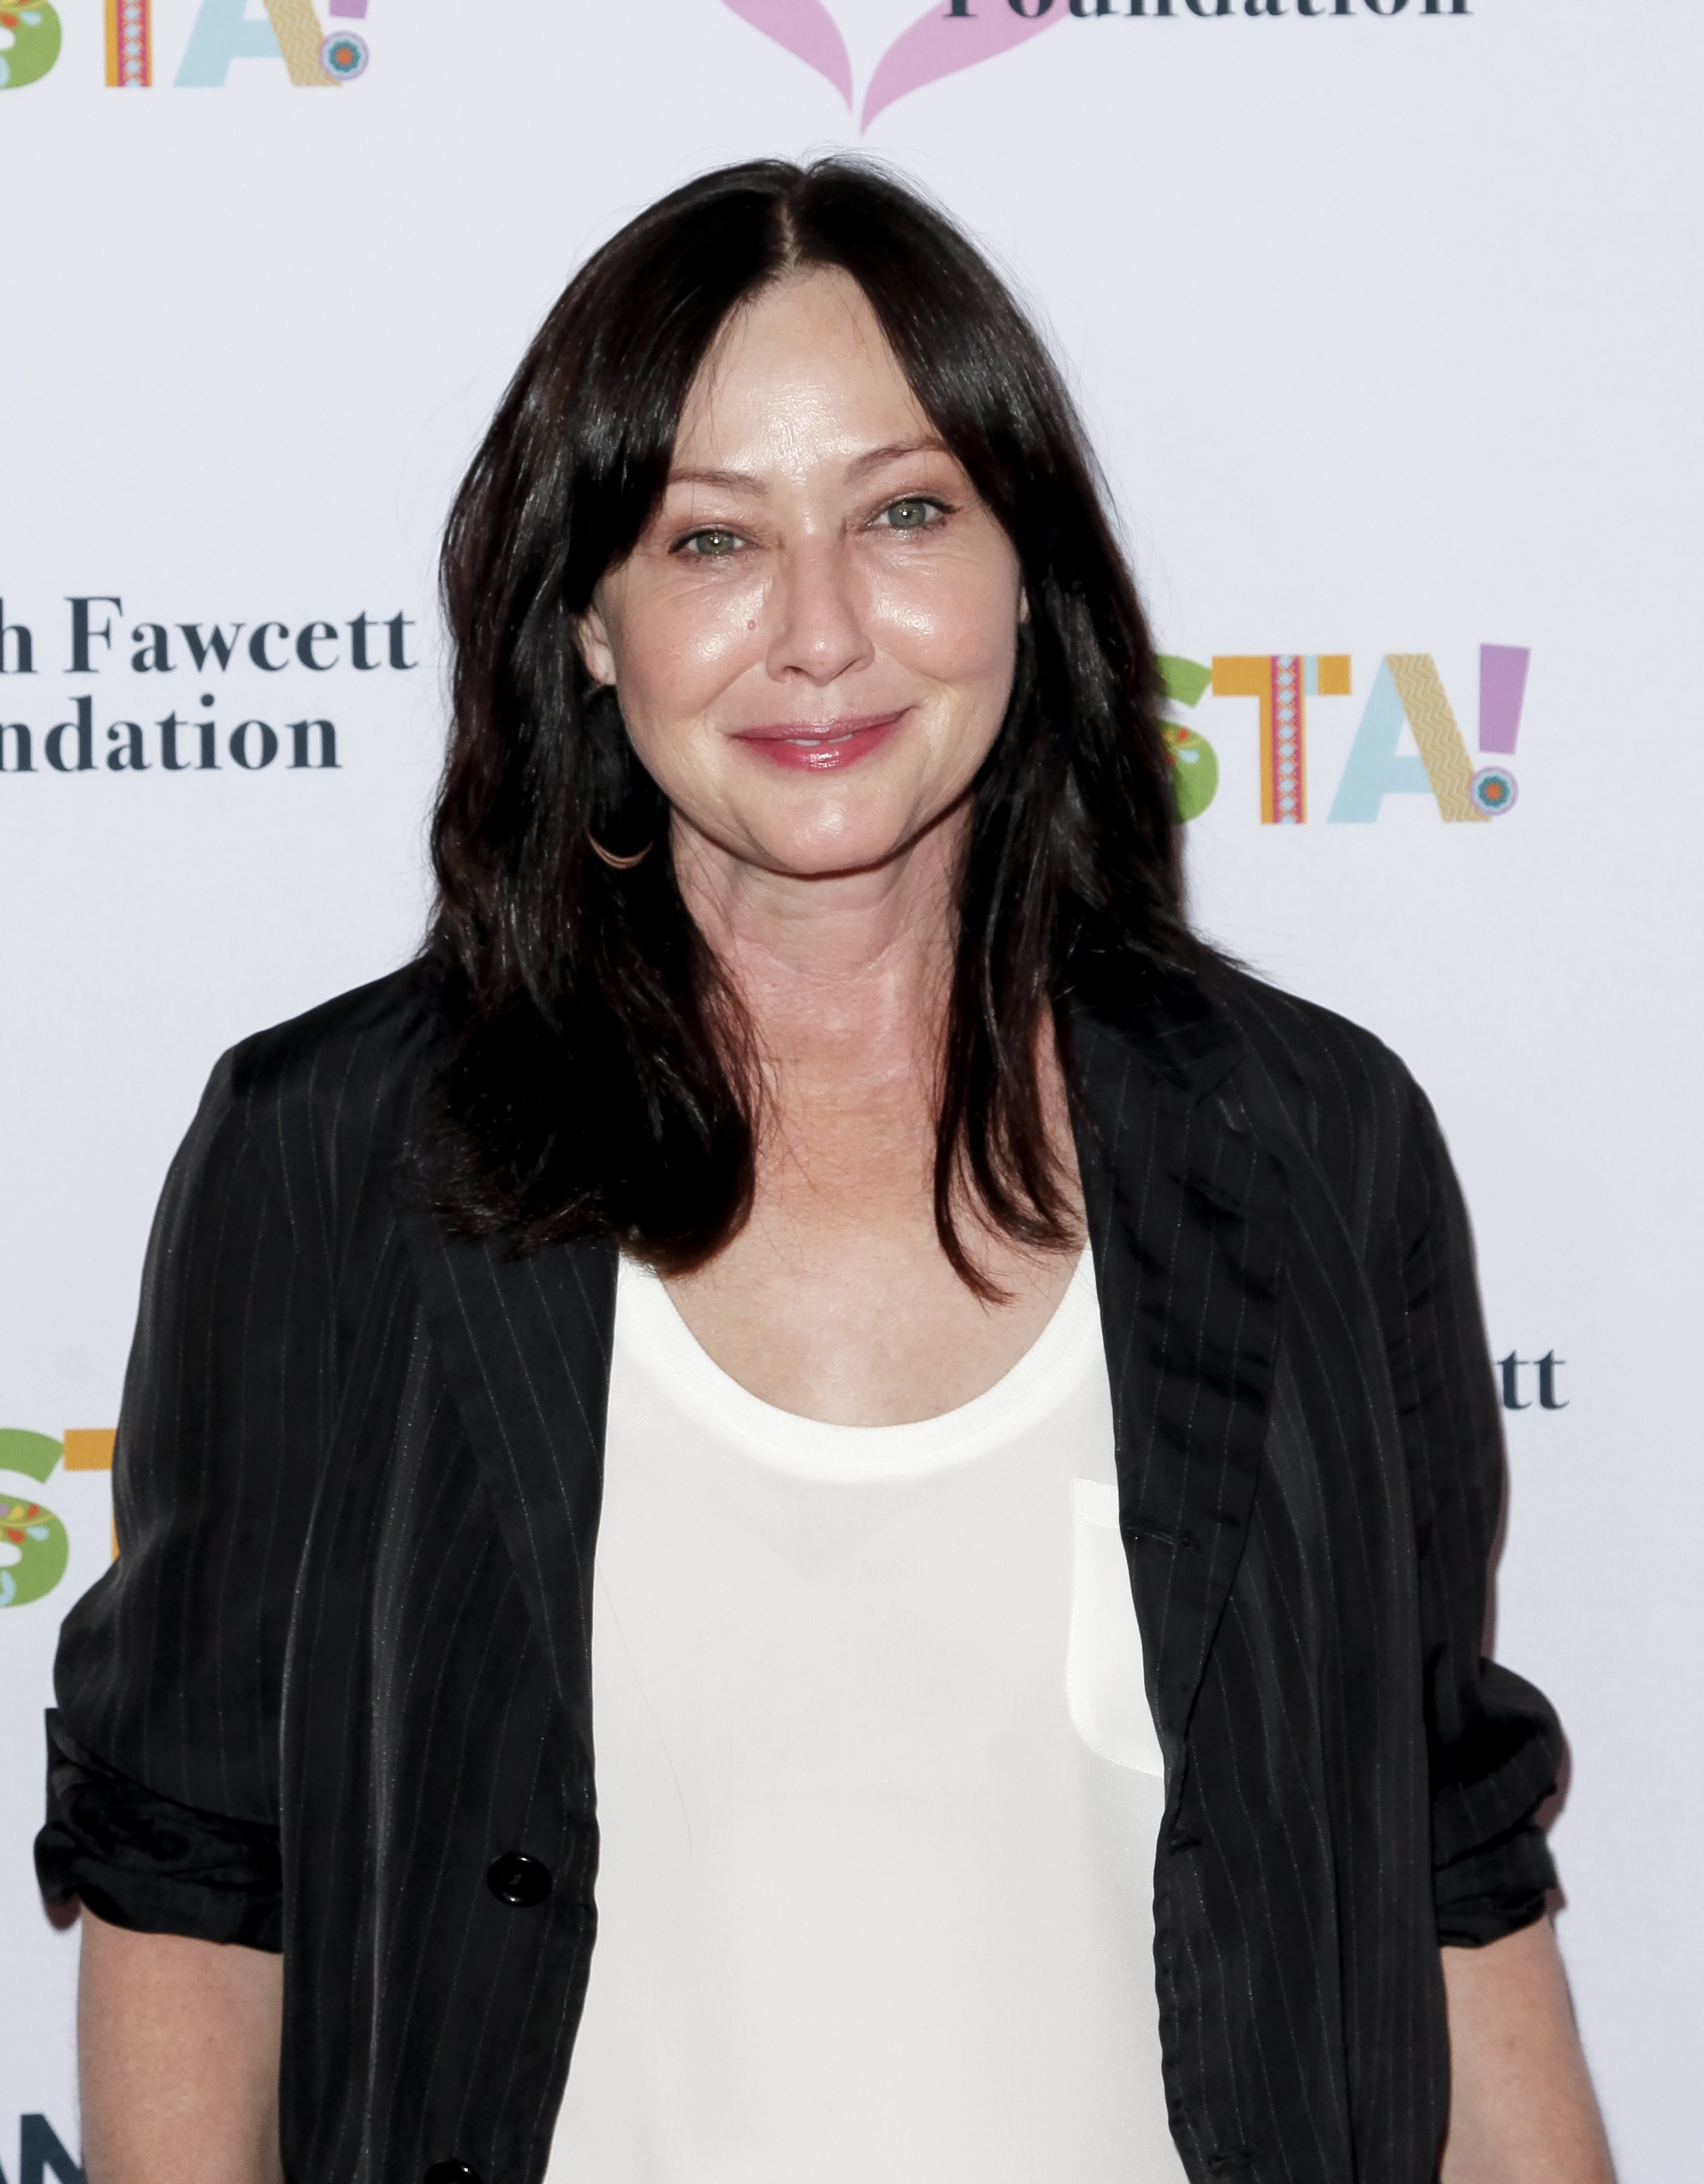 Shannen Doherty attends the Farrah Fawcett Foundation's Tex-Mex Fiesta at Wallis Annenberg Center for the Performing Arts in Beverly Hills, California on September 06, 2019. | Source: Getty Images